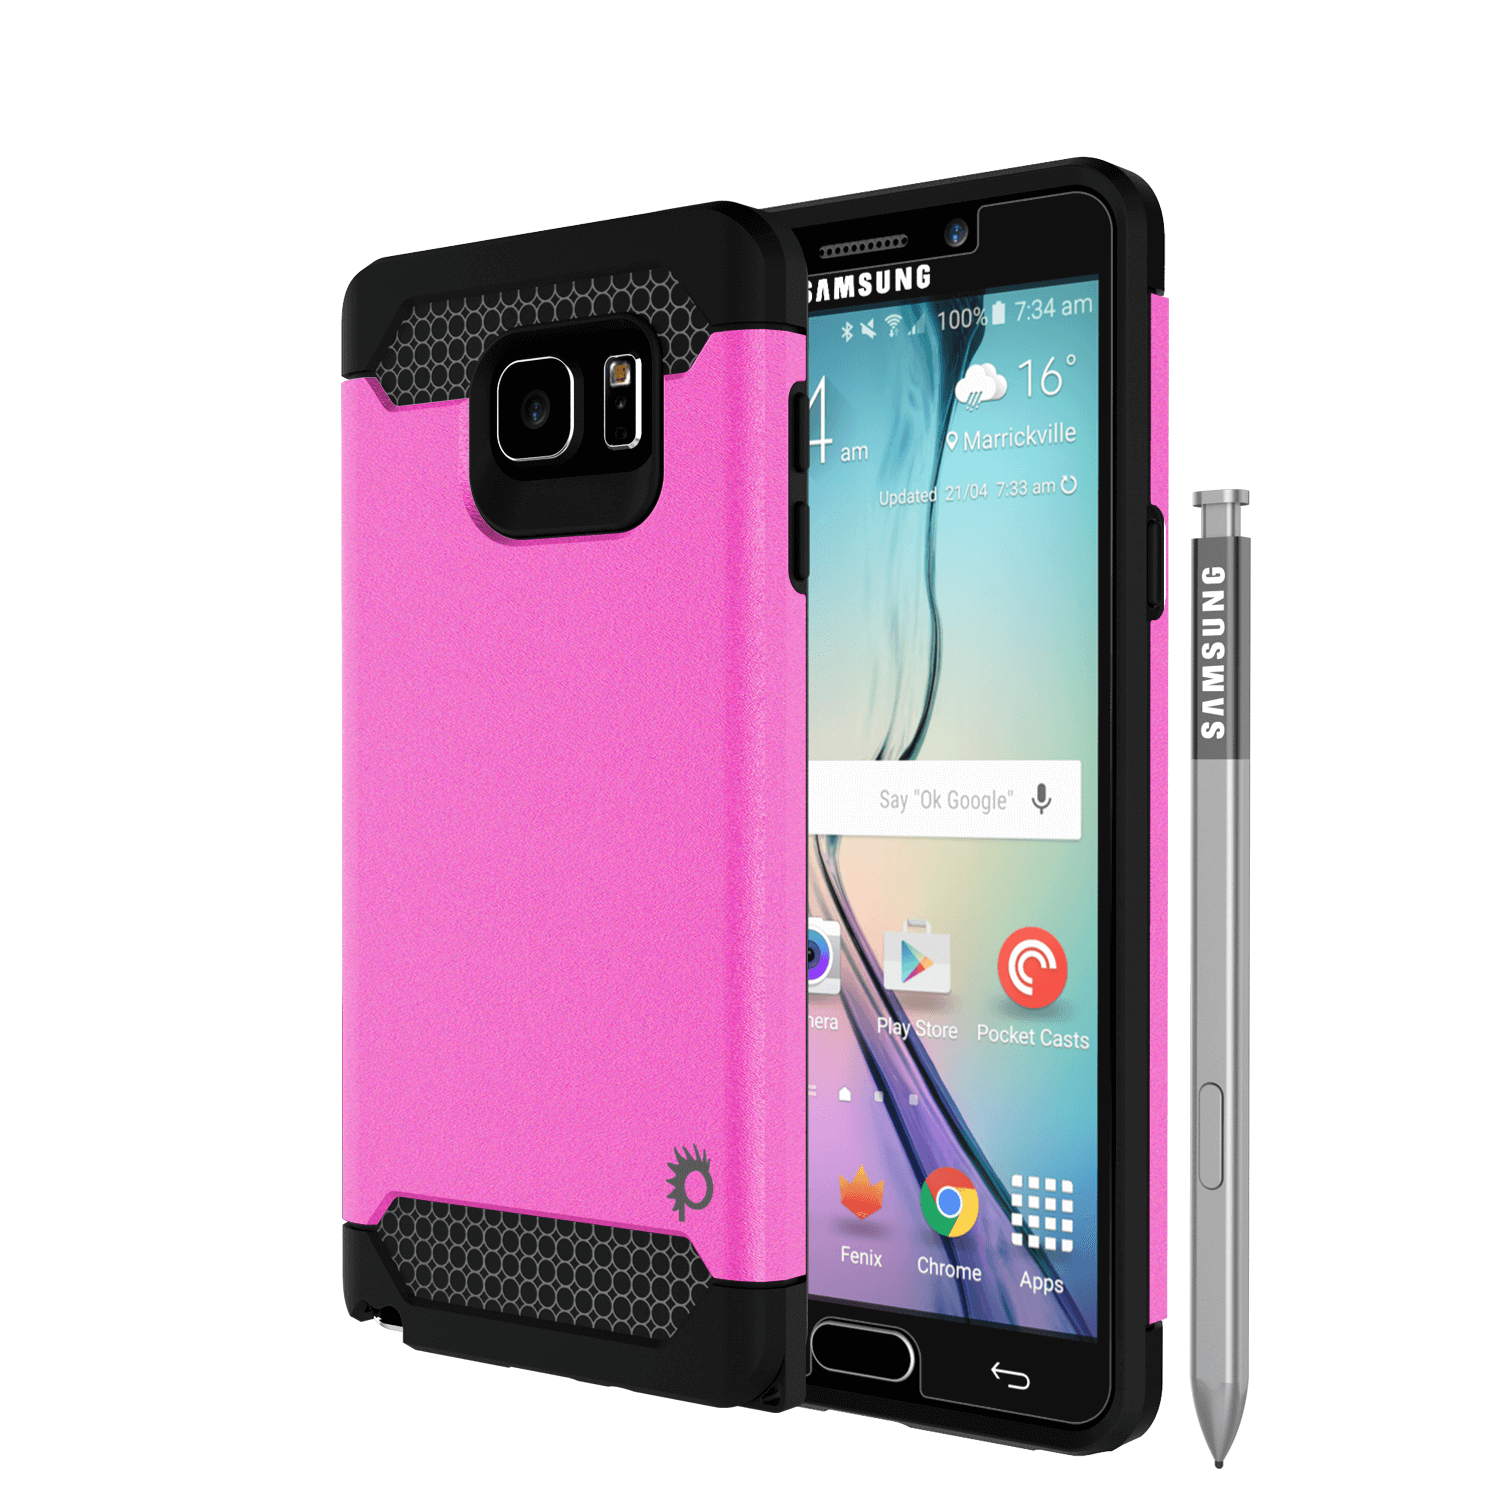 Galaxy Note 5 Case PunkCase Galactic Pink Series Slim Armor Soft Cover Case w/ Tempered Glass